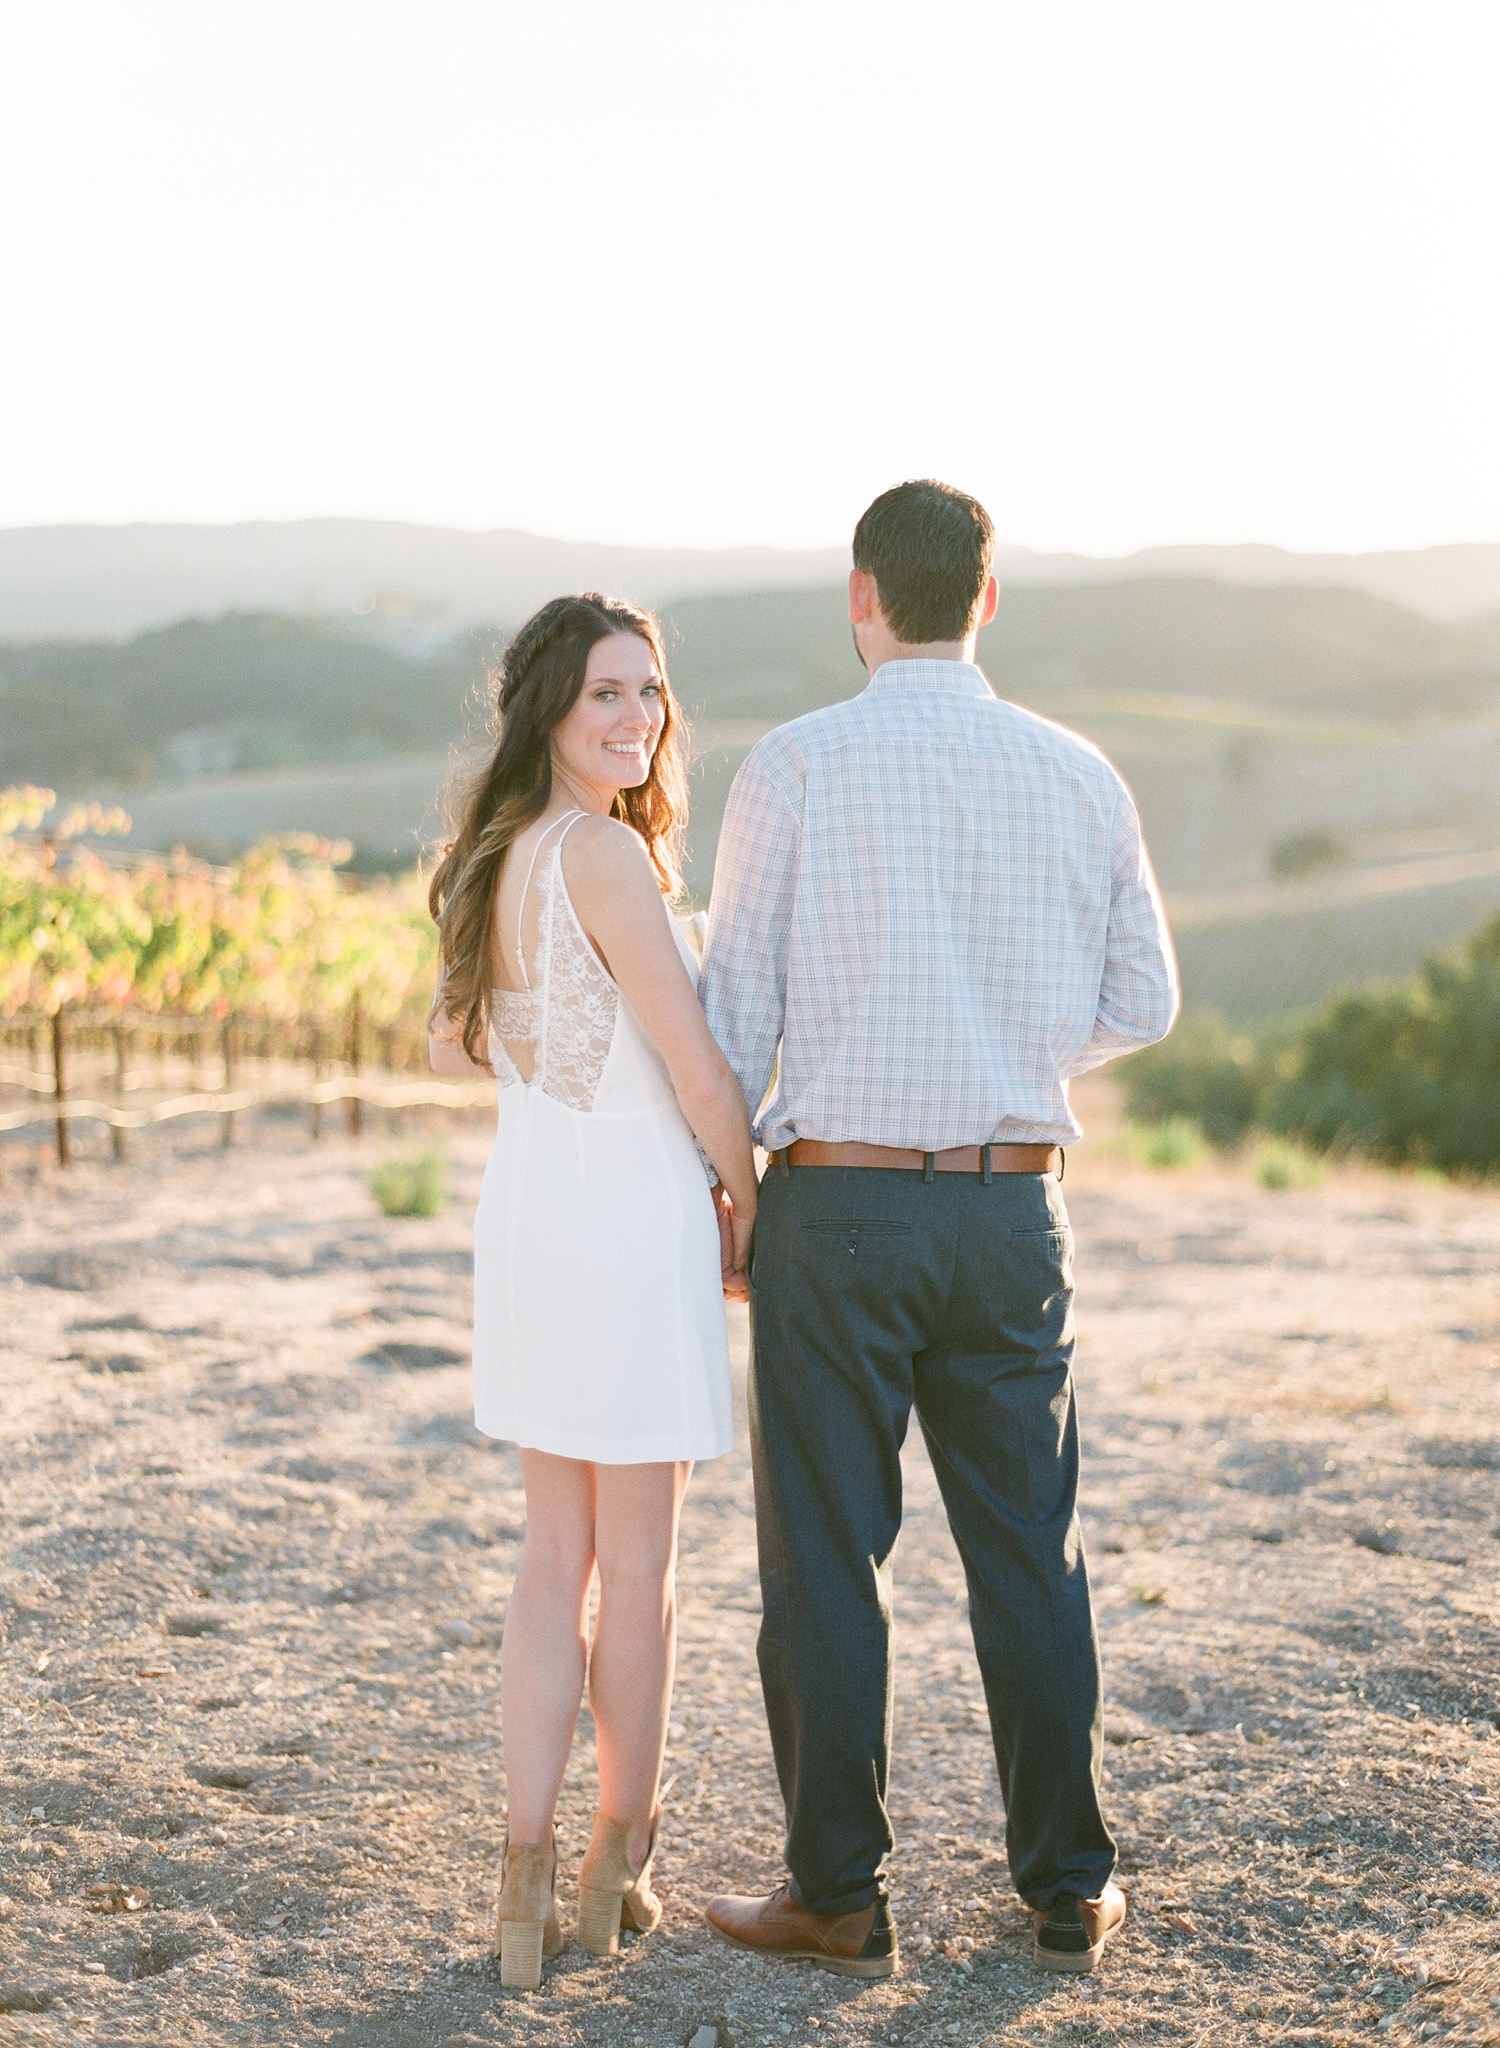 Provence Engagement Photographer | France Engagement Photography | Provence Wedding Photographer | Niner Winery | Paso Robles Engagement Session | Molly Carr Photography